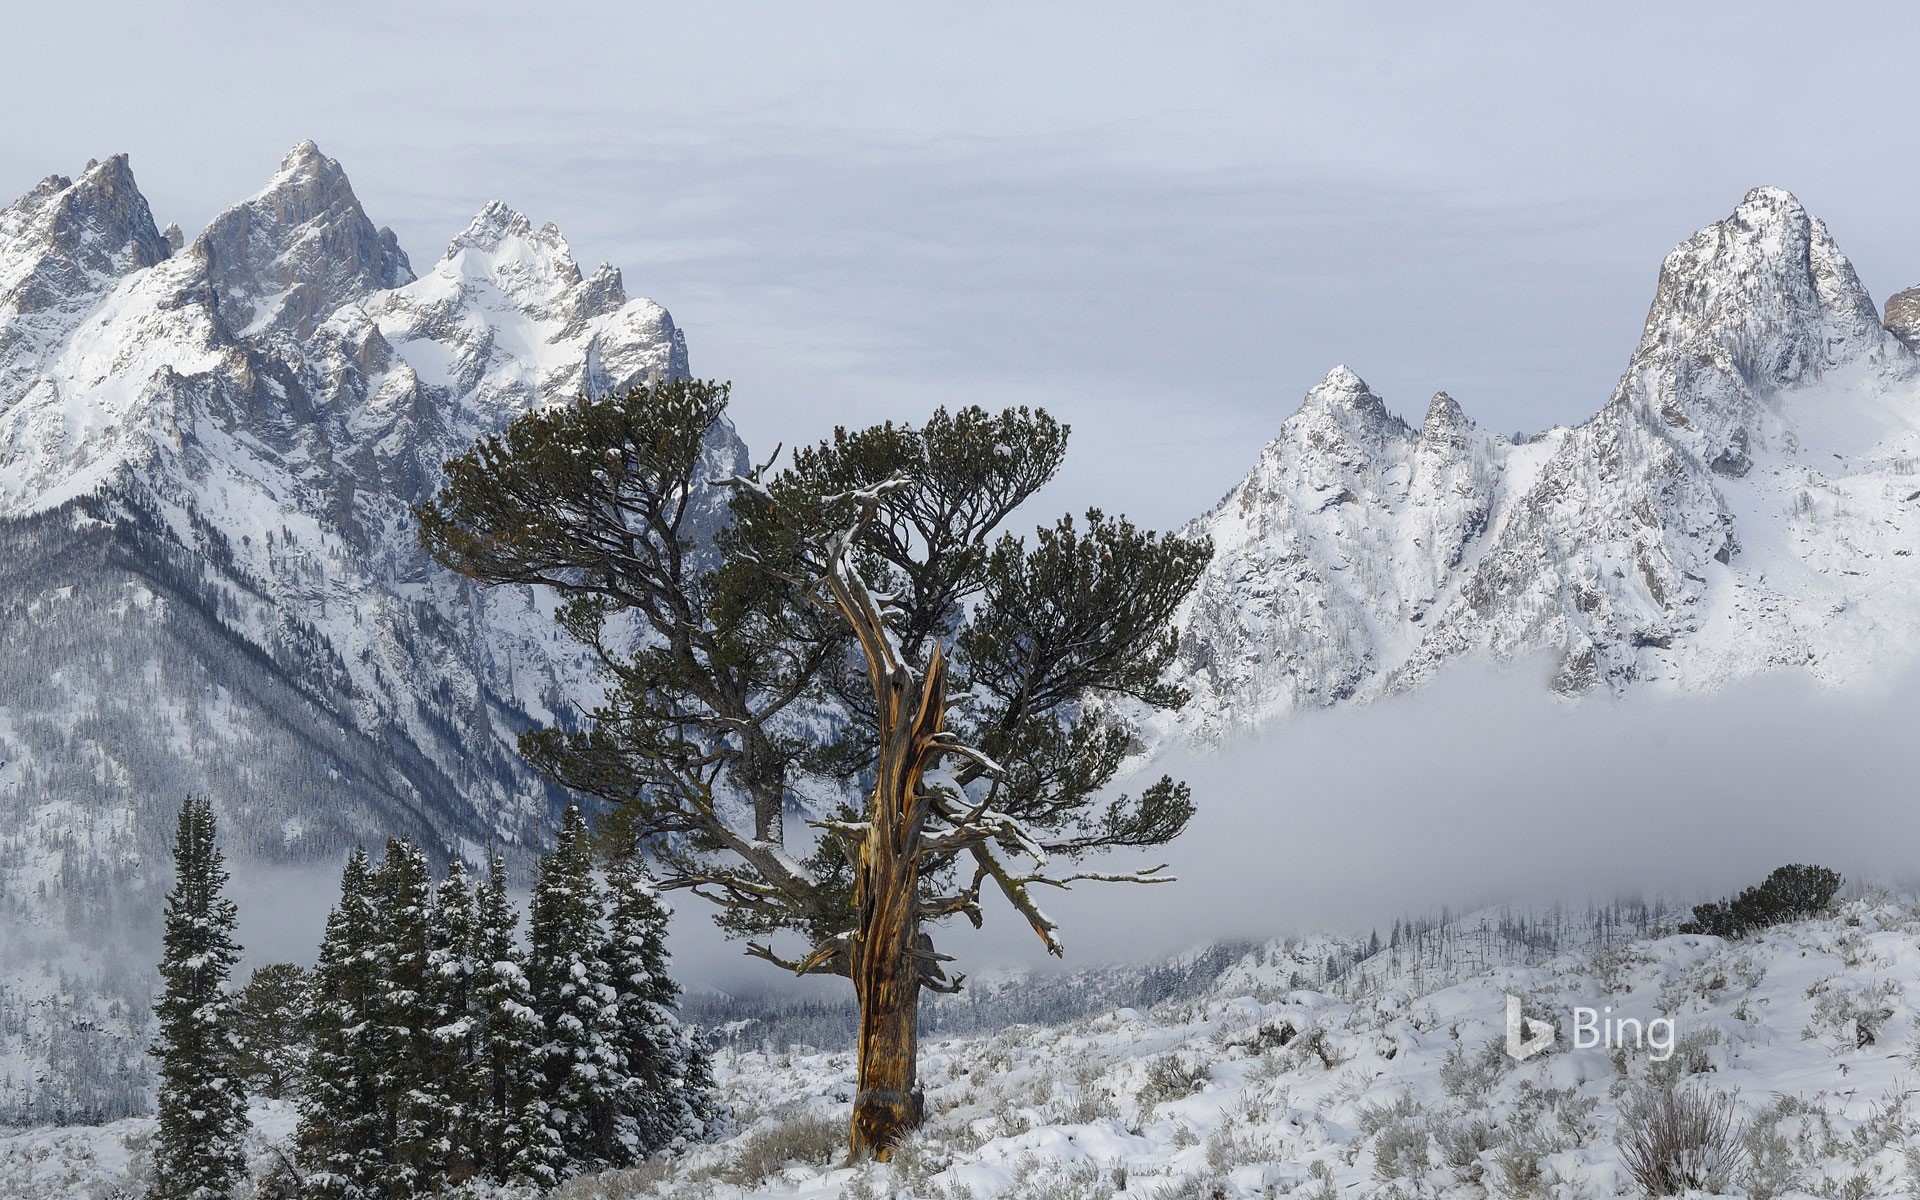 The Old Patriarch Tree of Grand Teton National Park, Wyoming